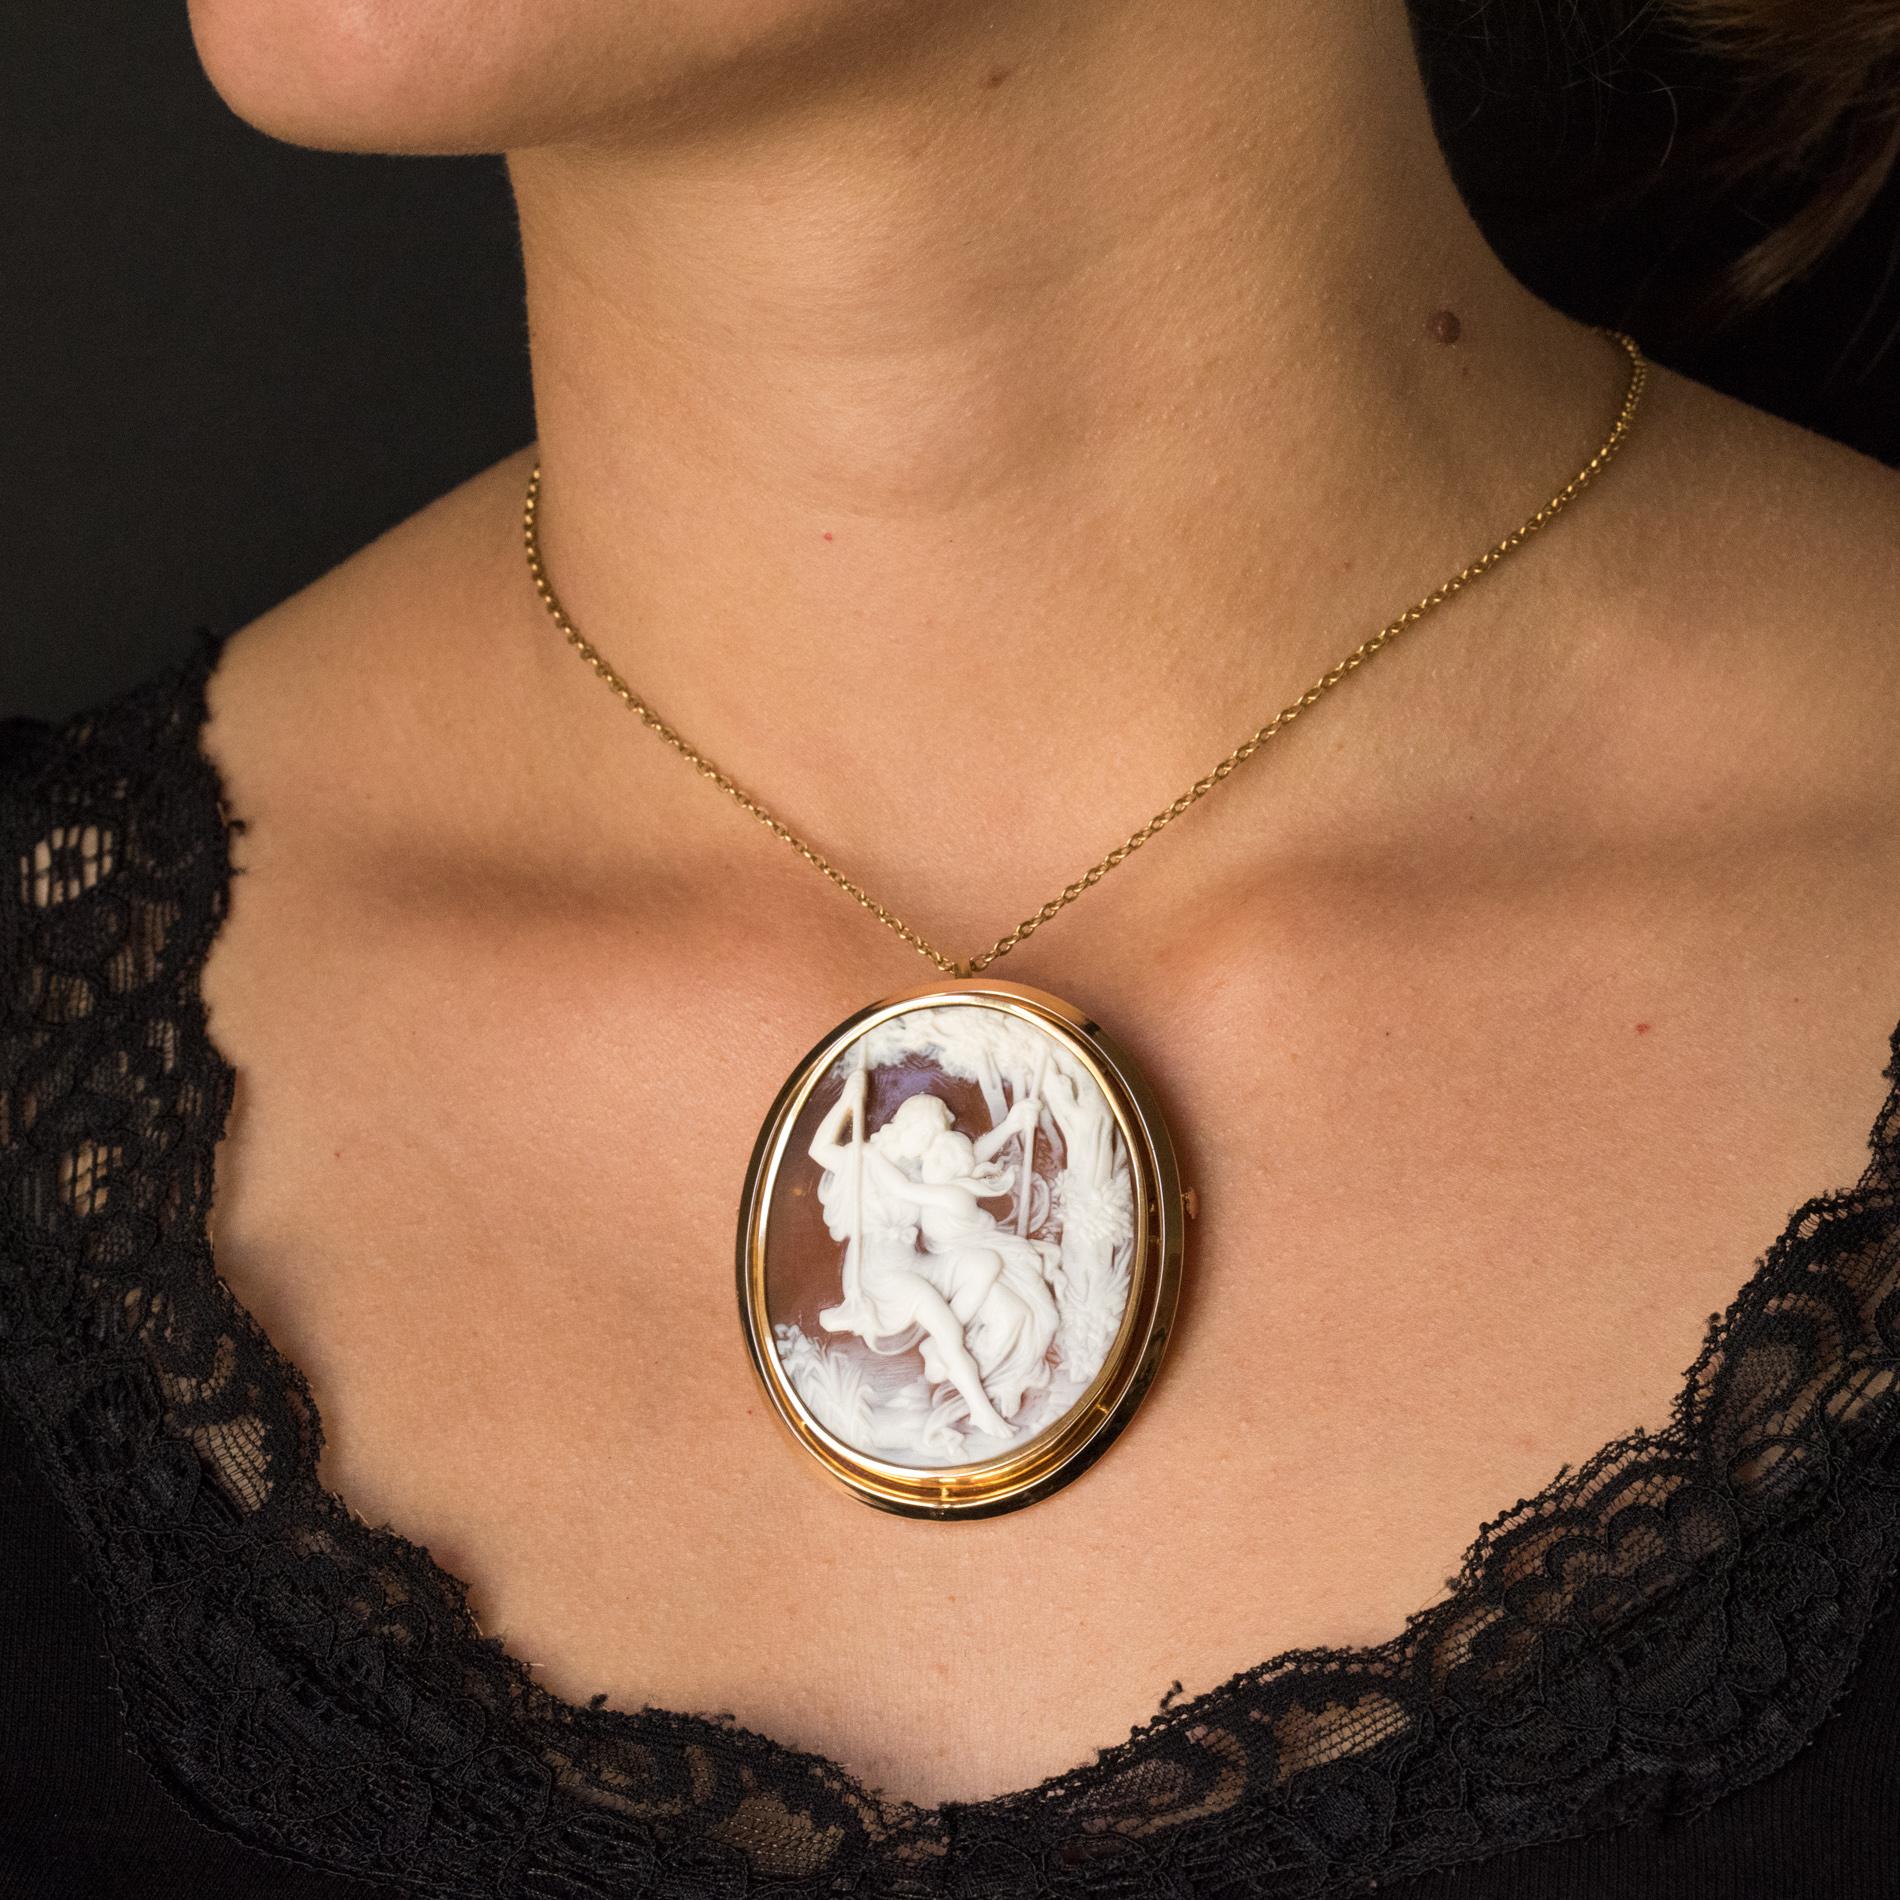 Brooch - pendant in 18 Karats yellow gold, eagle's head hallmark.
This elegant antique brooch is closed set with a shell cameo representing a romantic scene finely realized. The brooch has a safety pin and a bail for wearing the jewel as a